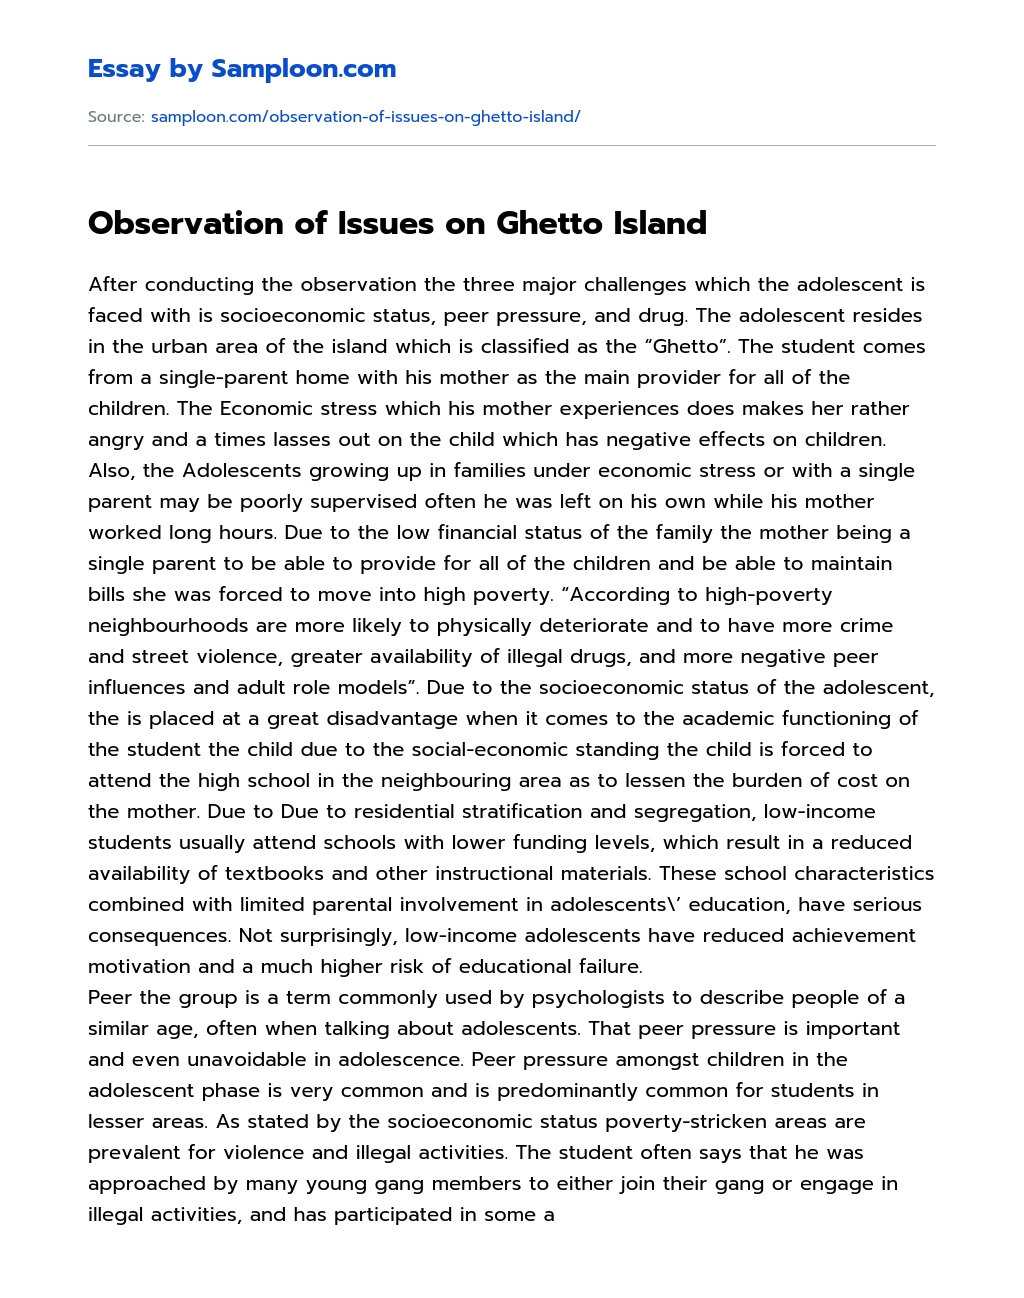 Observation of Issues on Ghetto Island essay